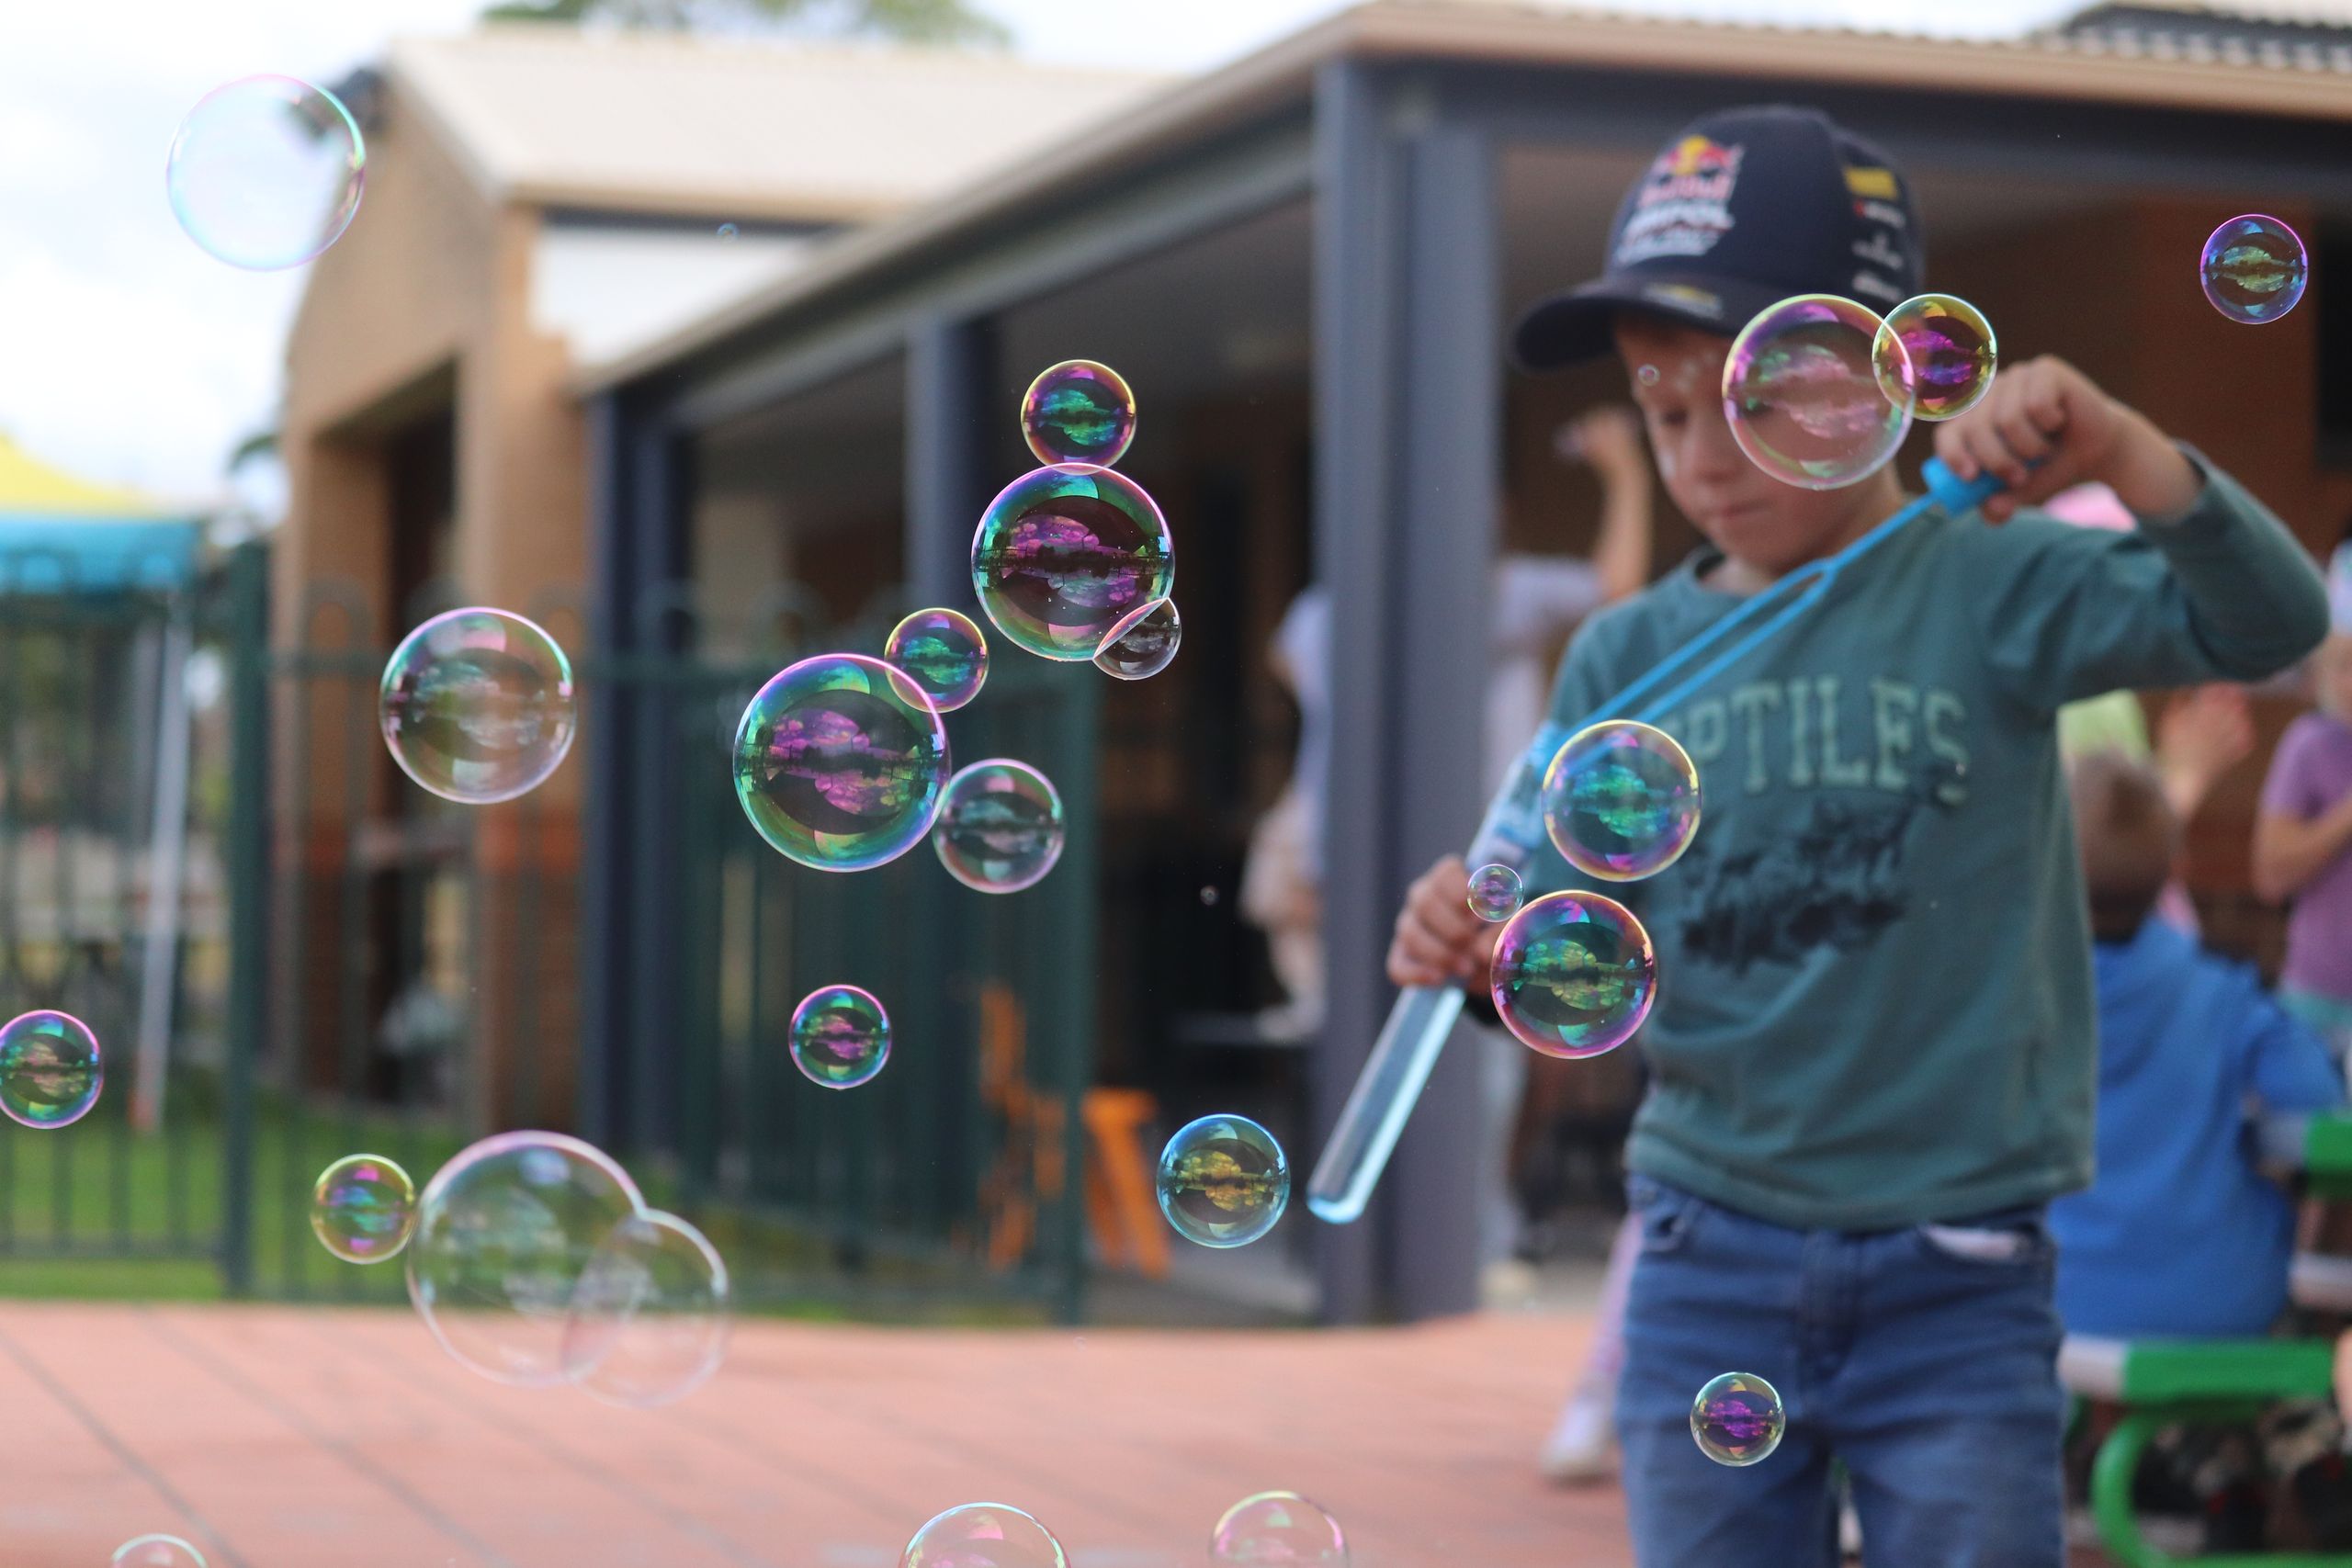 Student blowing bubbles during foundation day, bubbles are in focus while student is in soft focus.